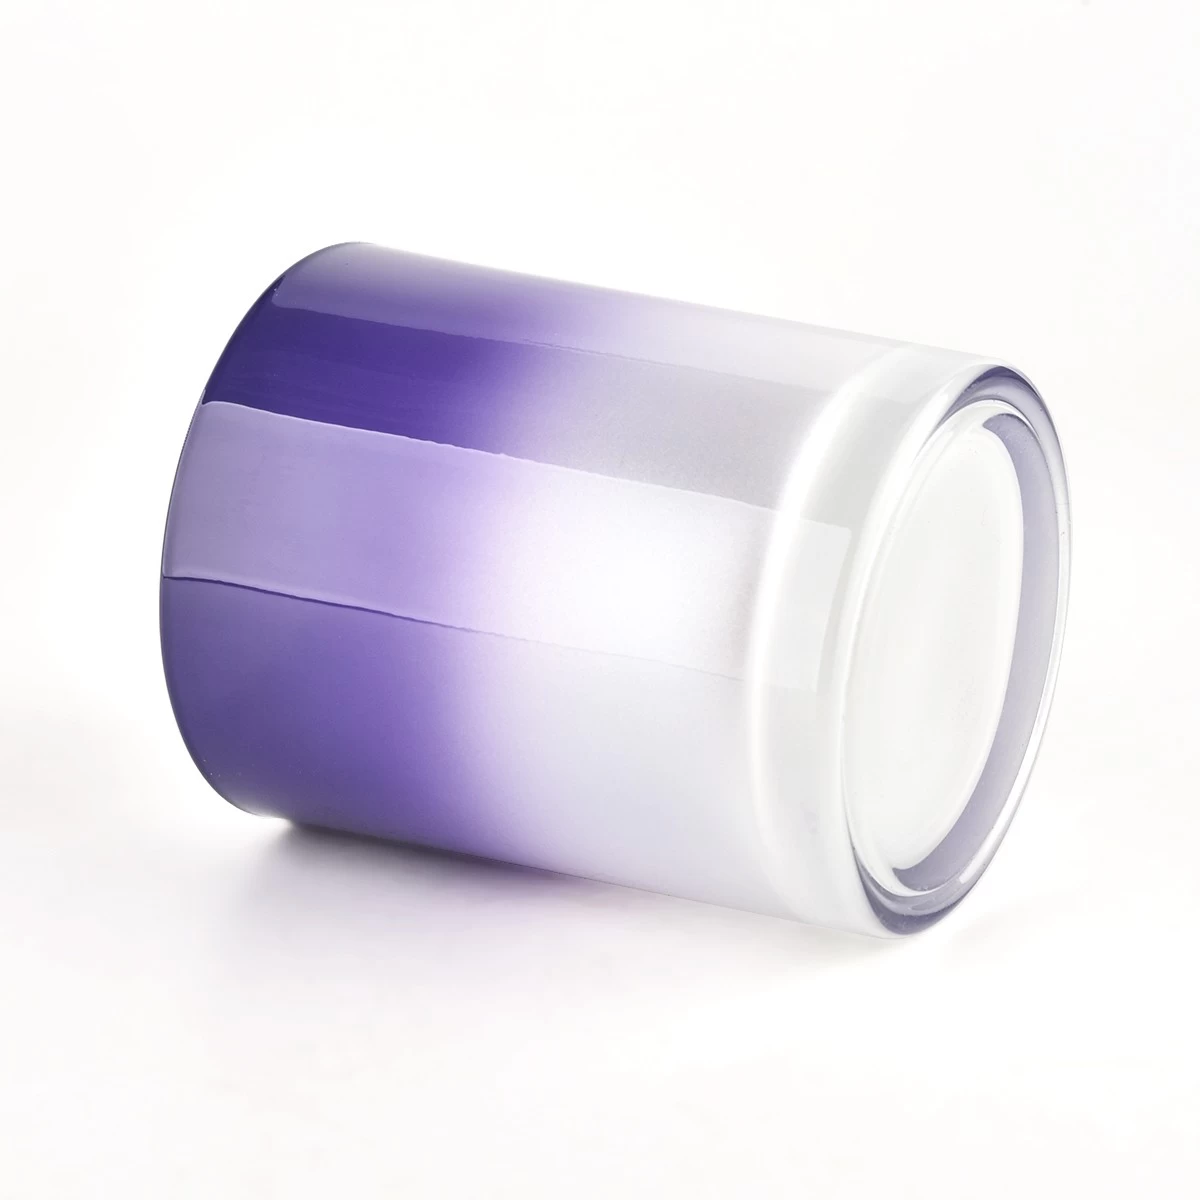 New design glossy glass candle jar with gradient purple supplier